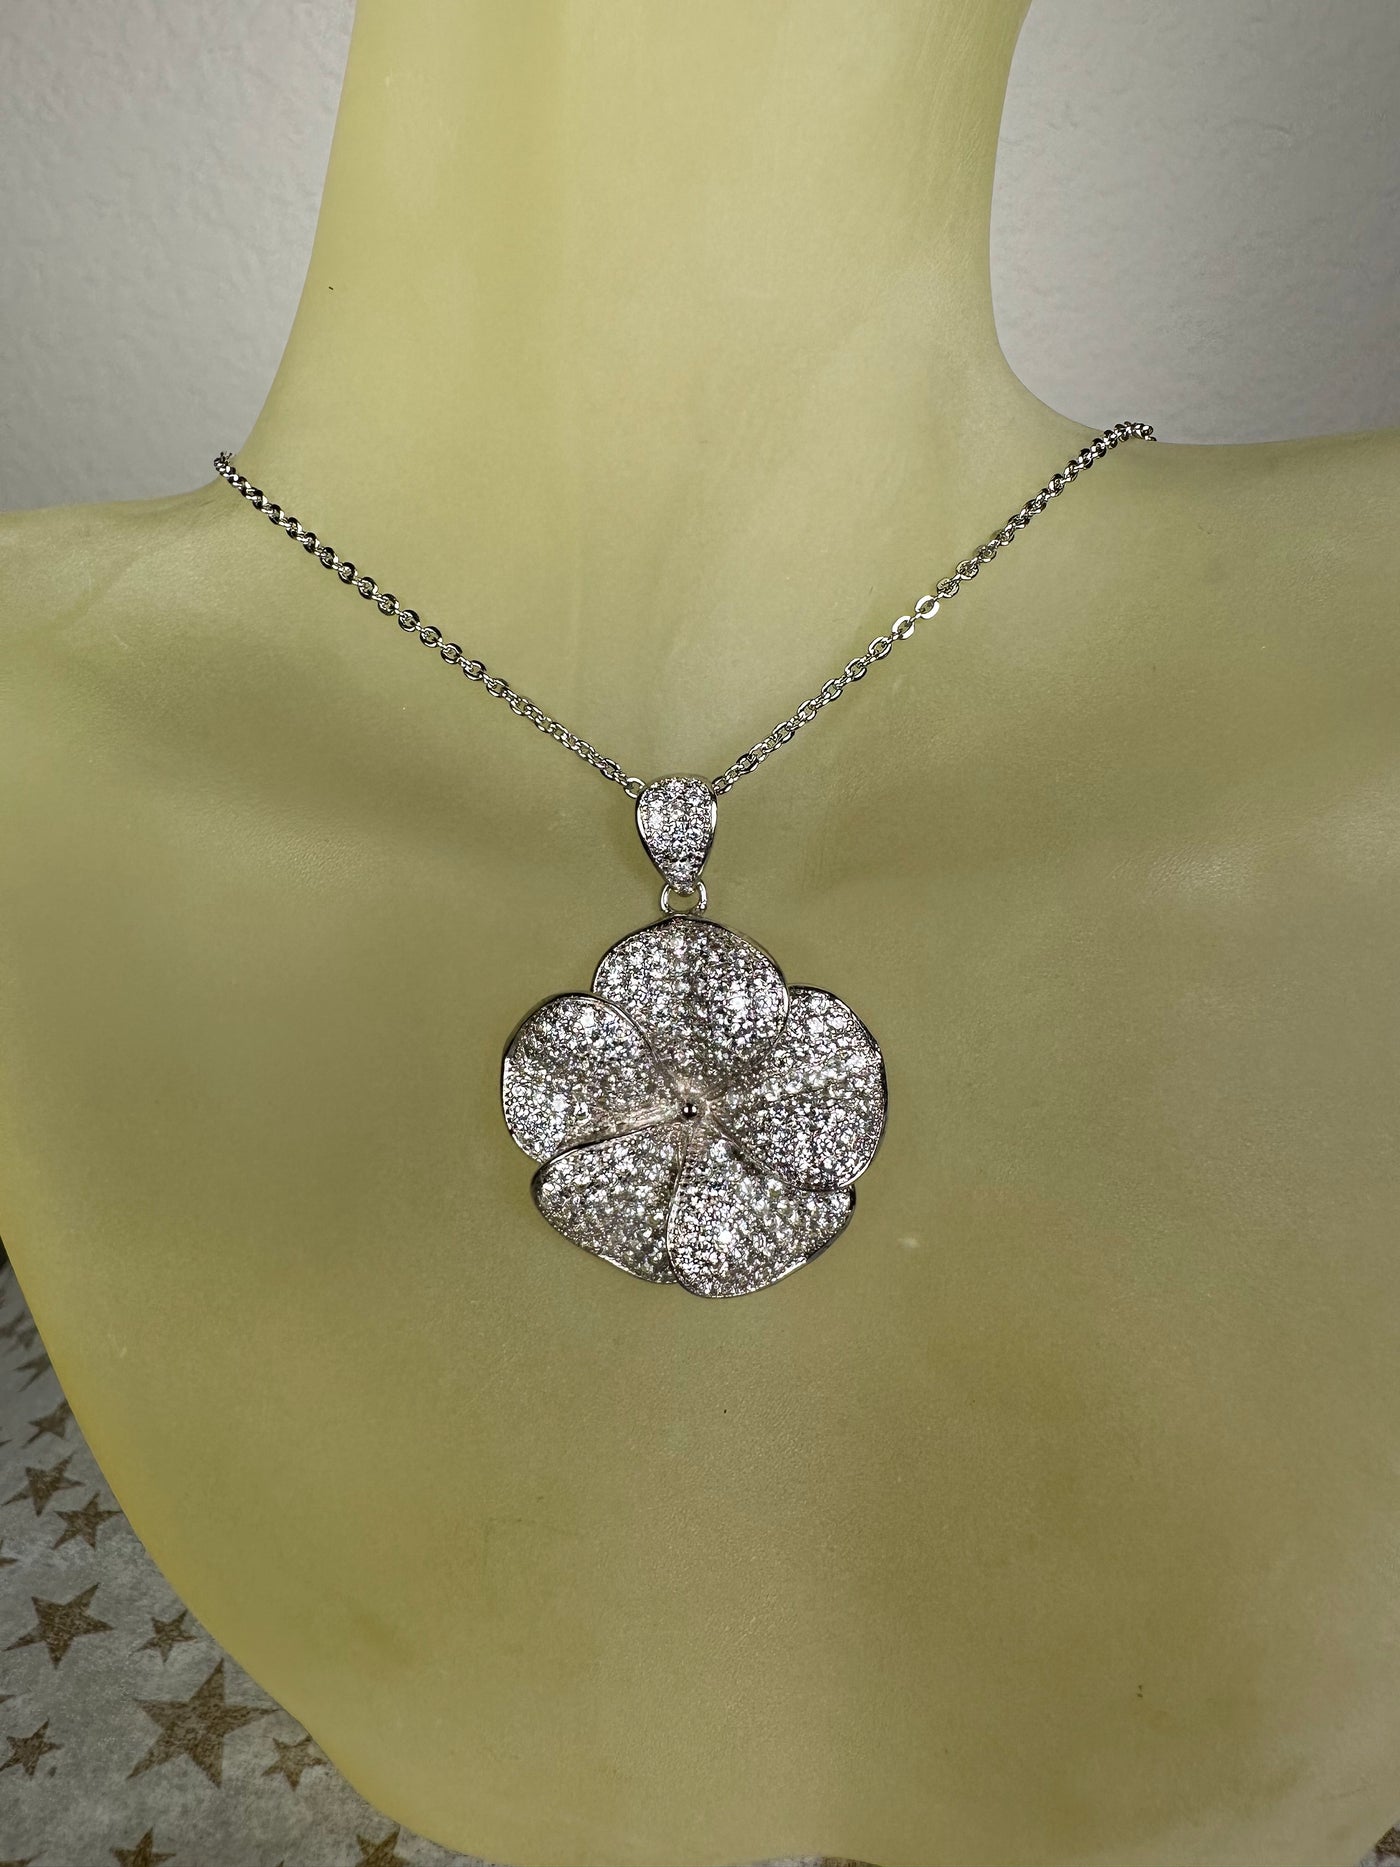 "Larger" Pave Set Cubic Zirconia Flower Pendant in Silver, Yellow Gold and Rose Gold Tone